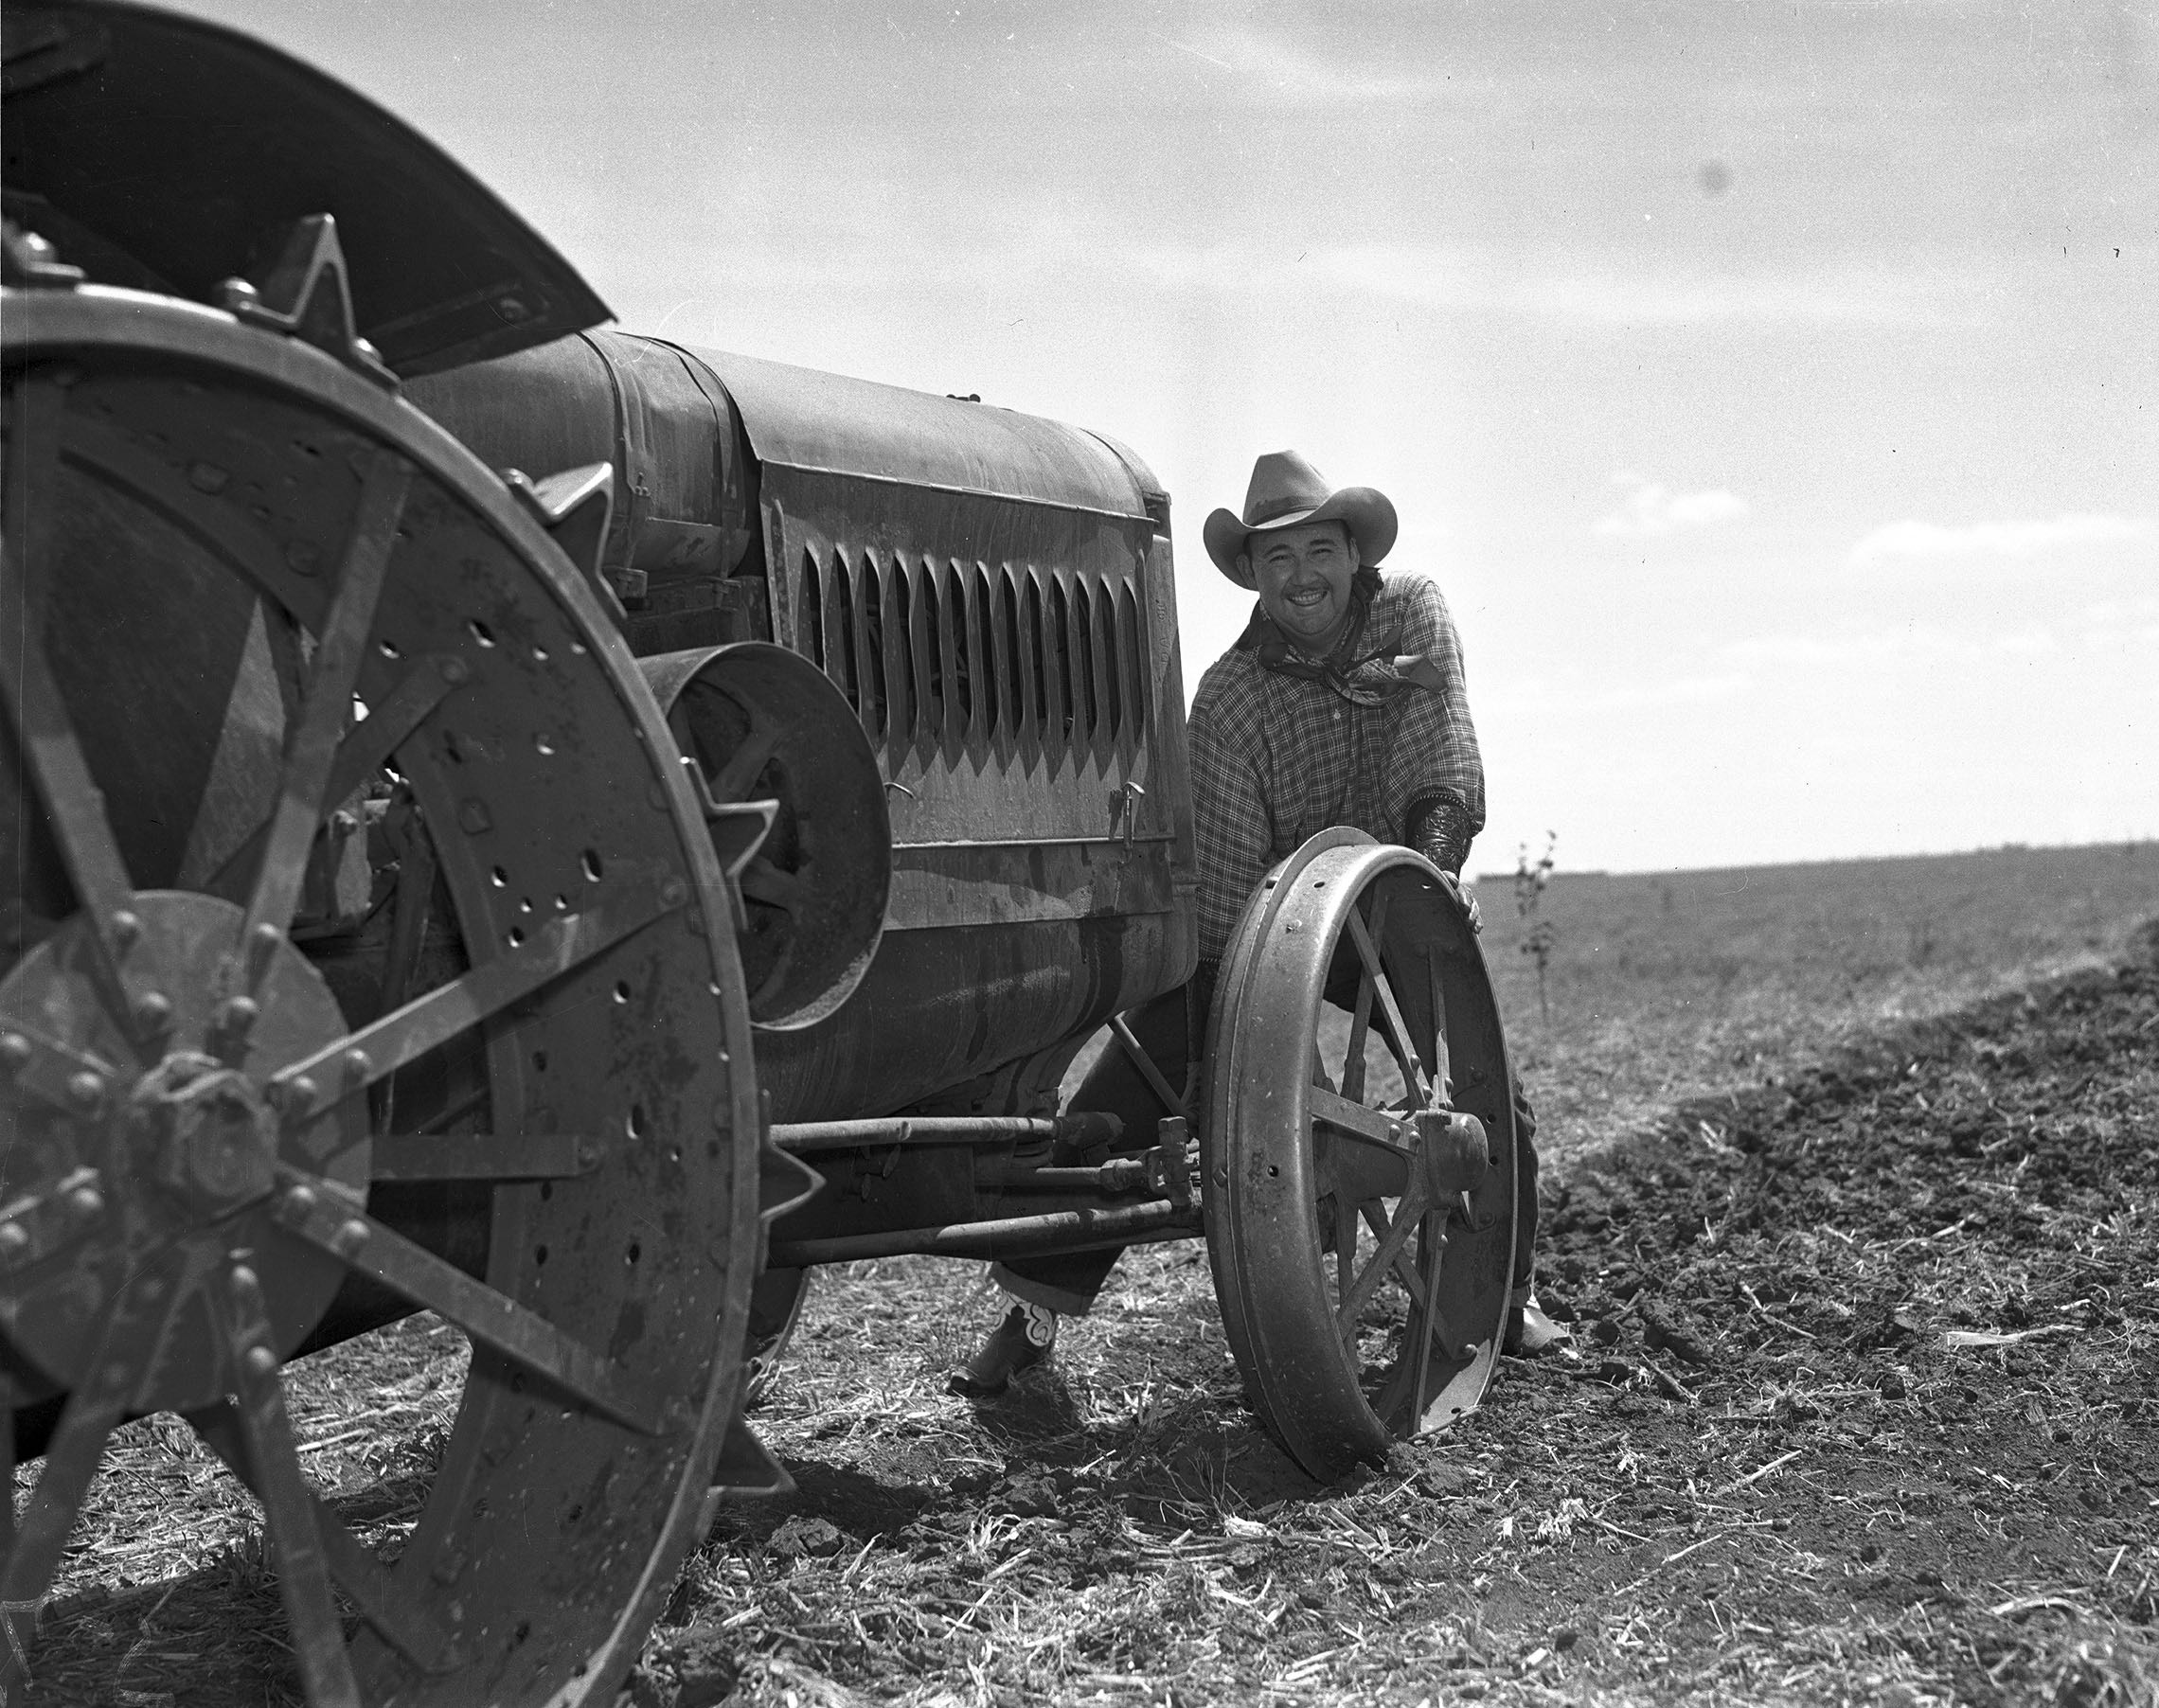 Whiteman in front of a tractor